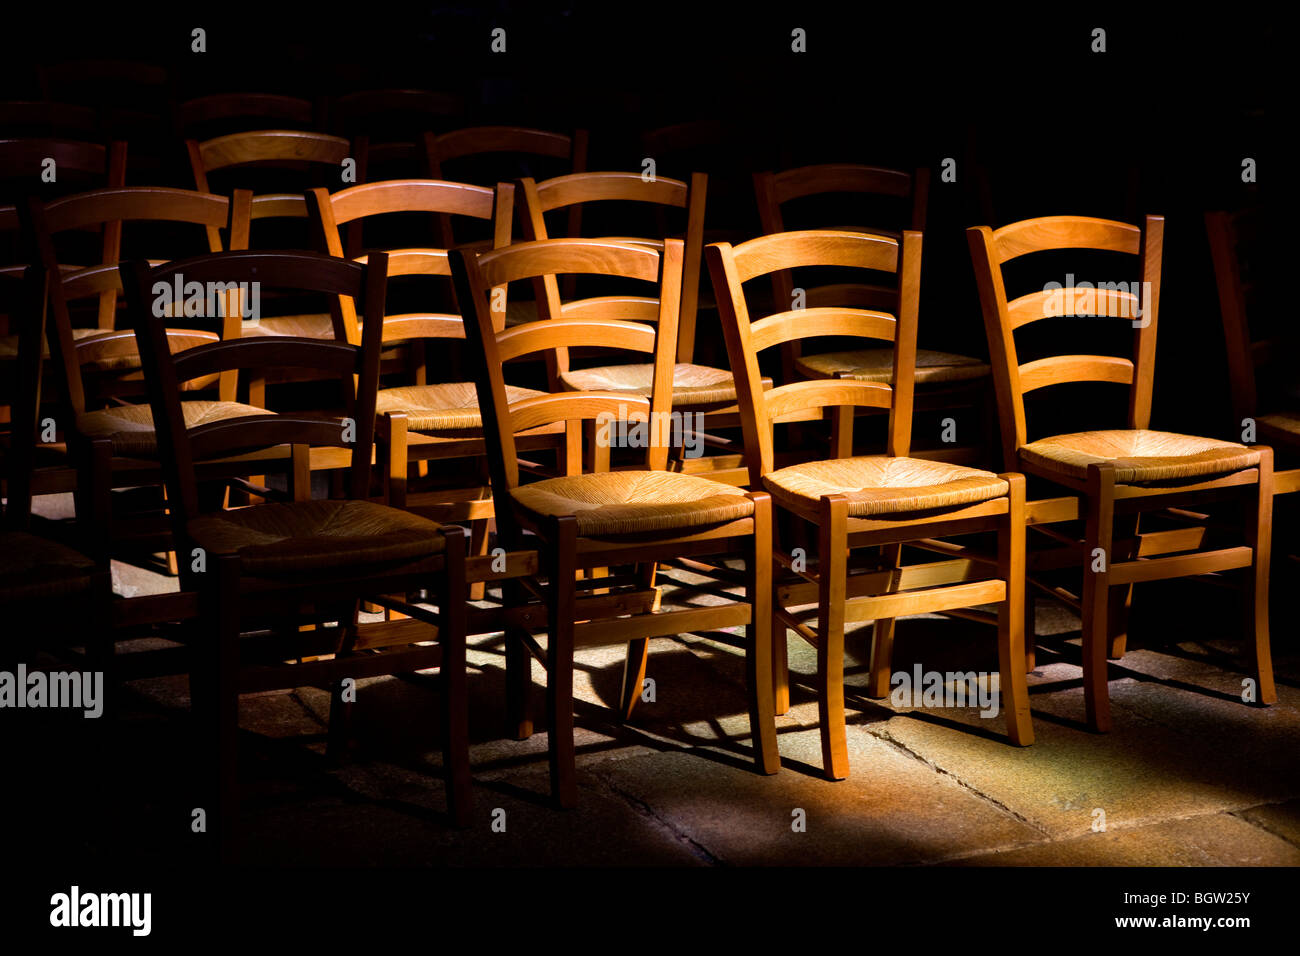 Illuminated row of chairs, Trequier, Brittany, France, Europe Stock Photo